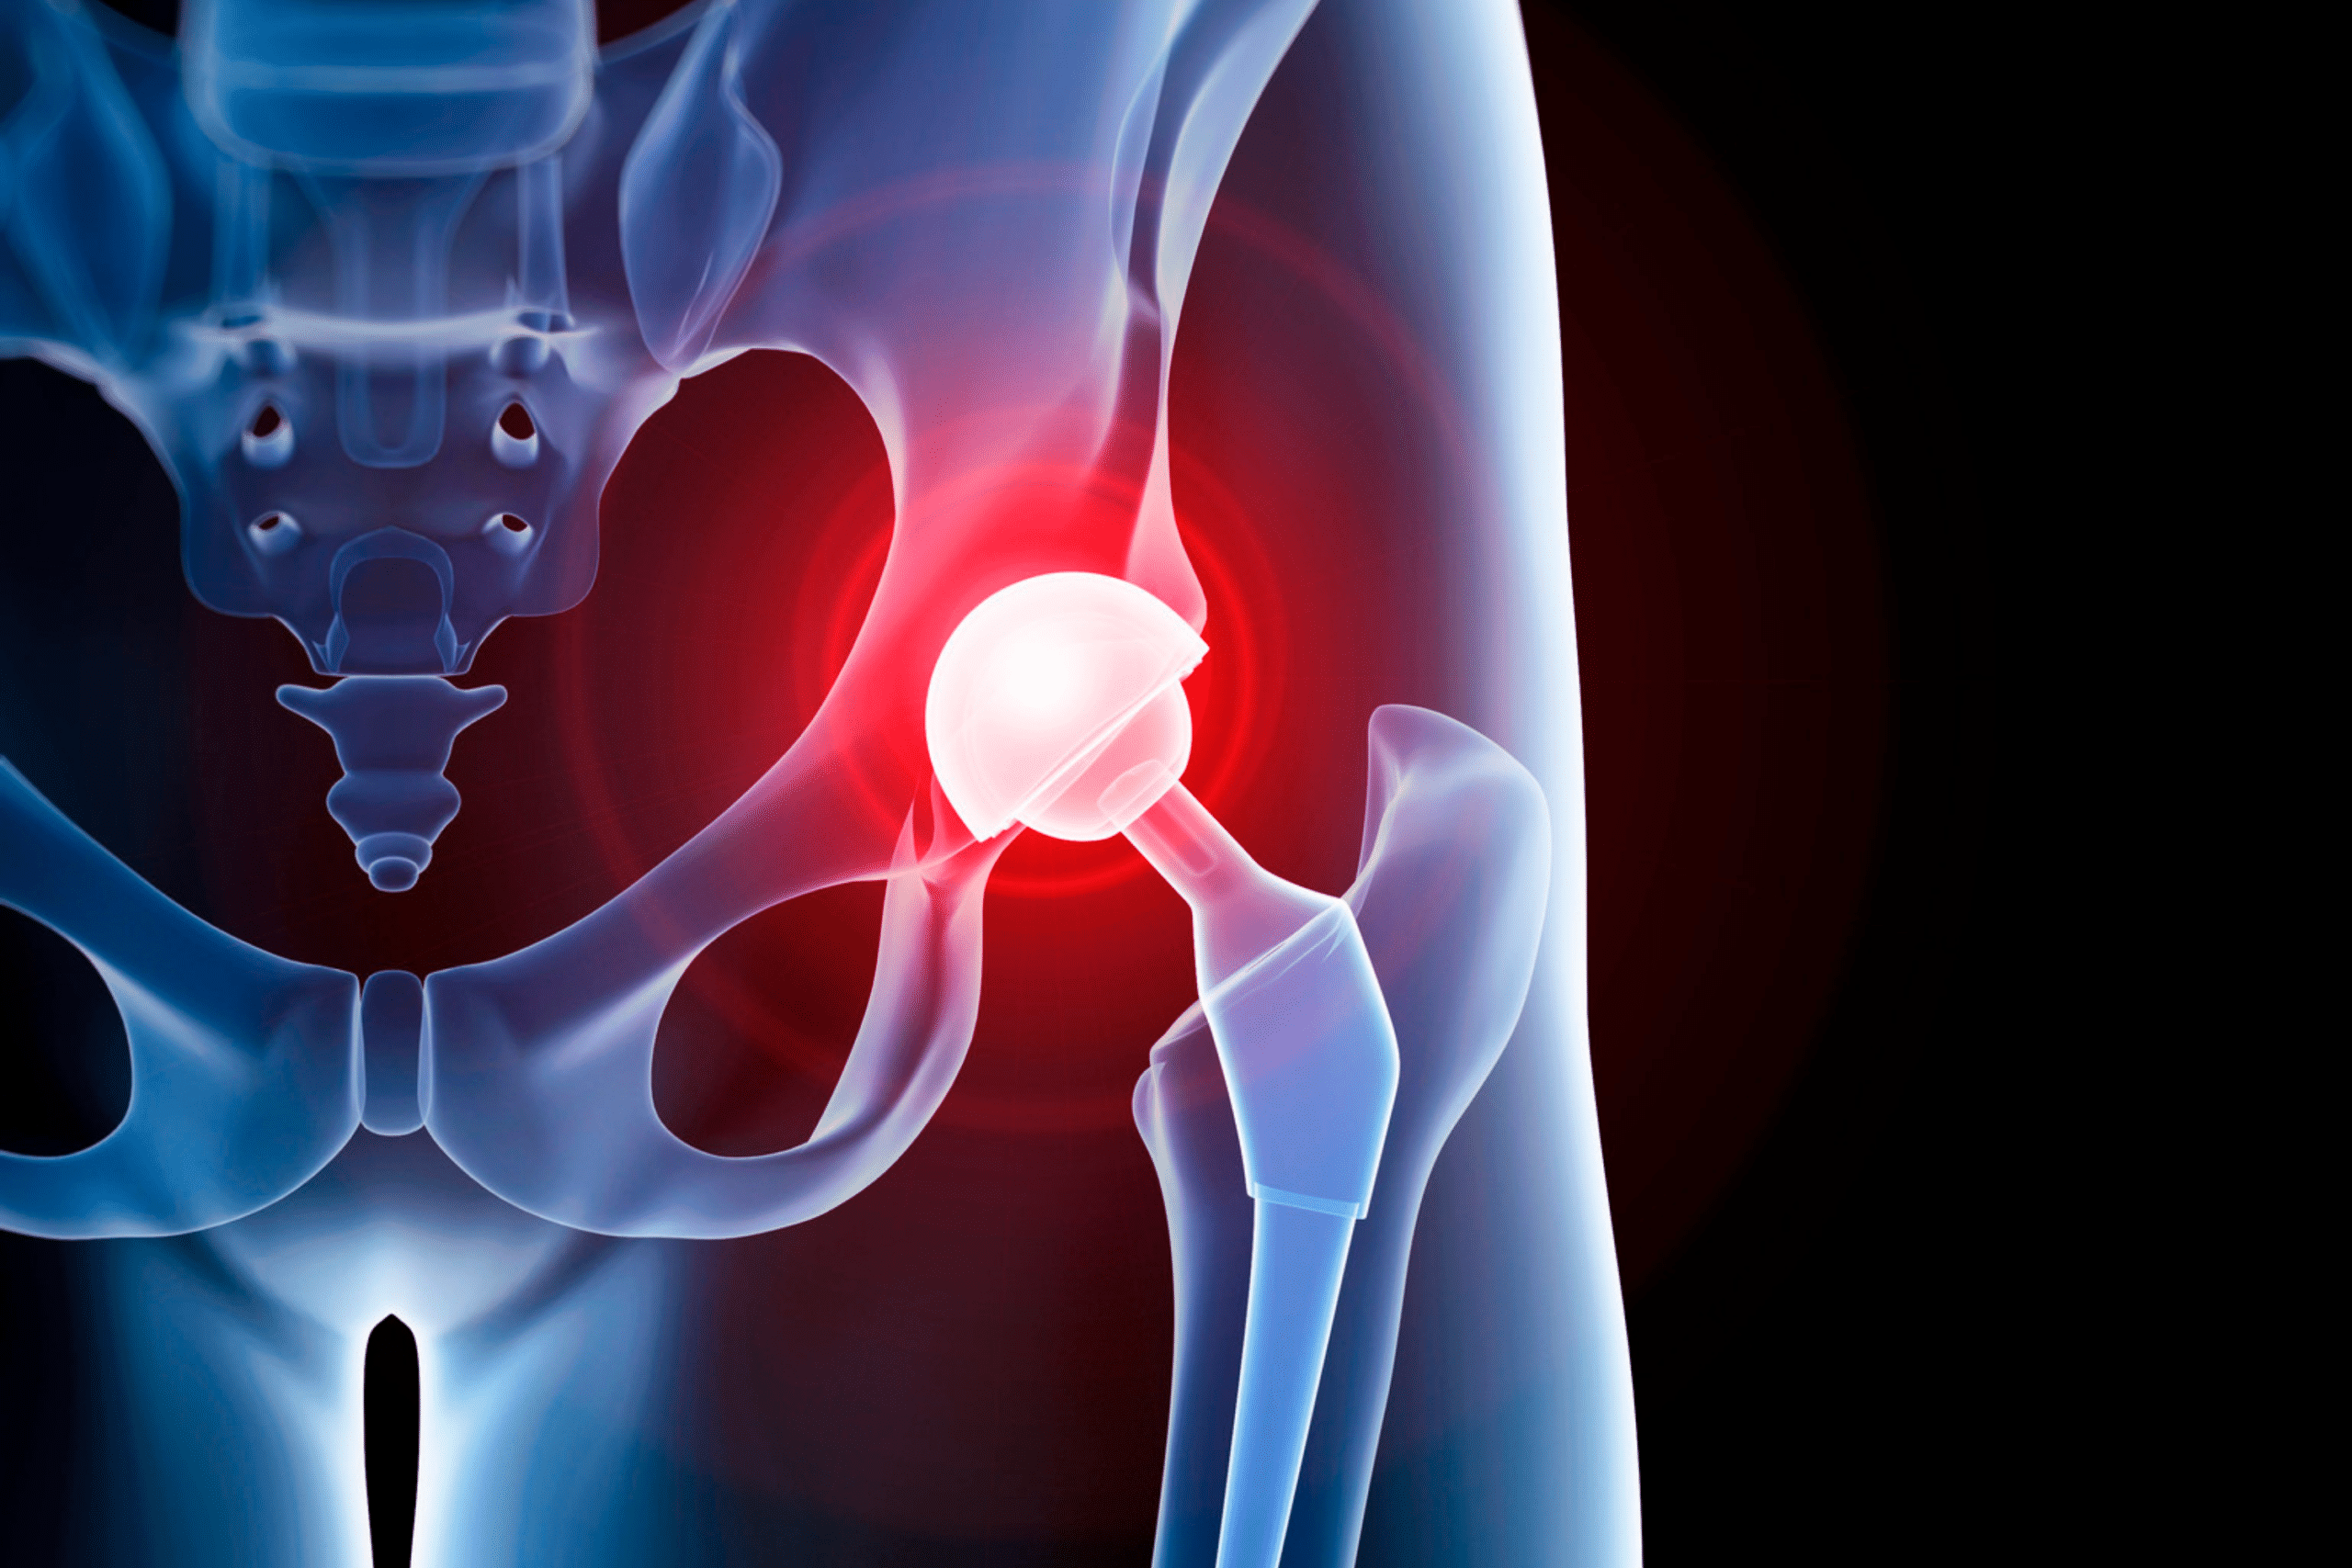 Metal-on-Metal Hip Implants: Risks, Symptoms, and Legal Recourse in NY